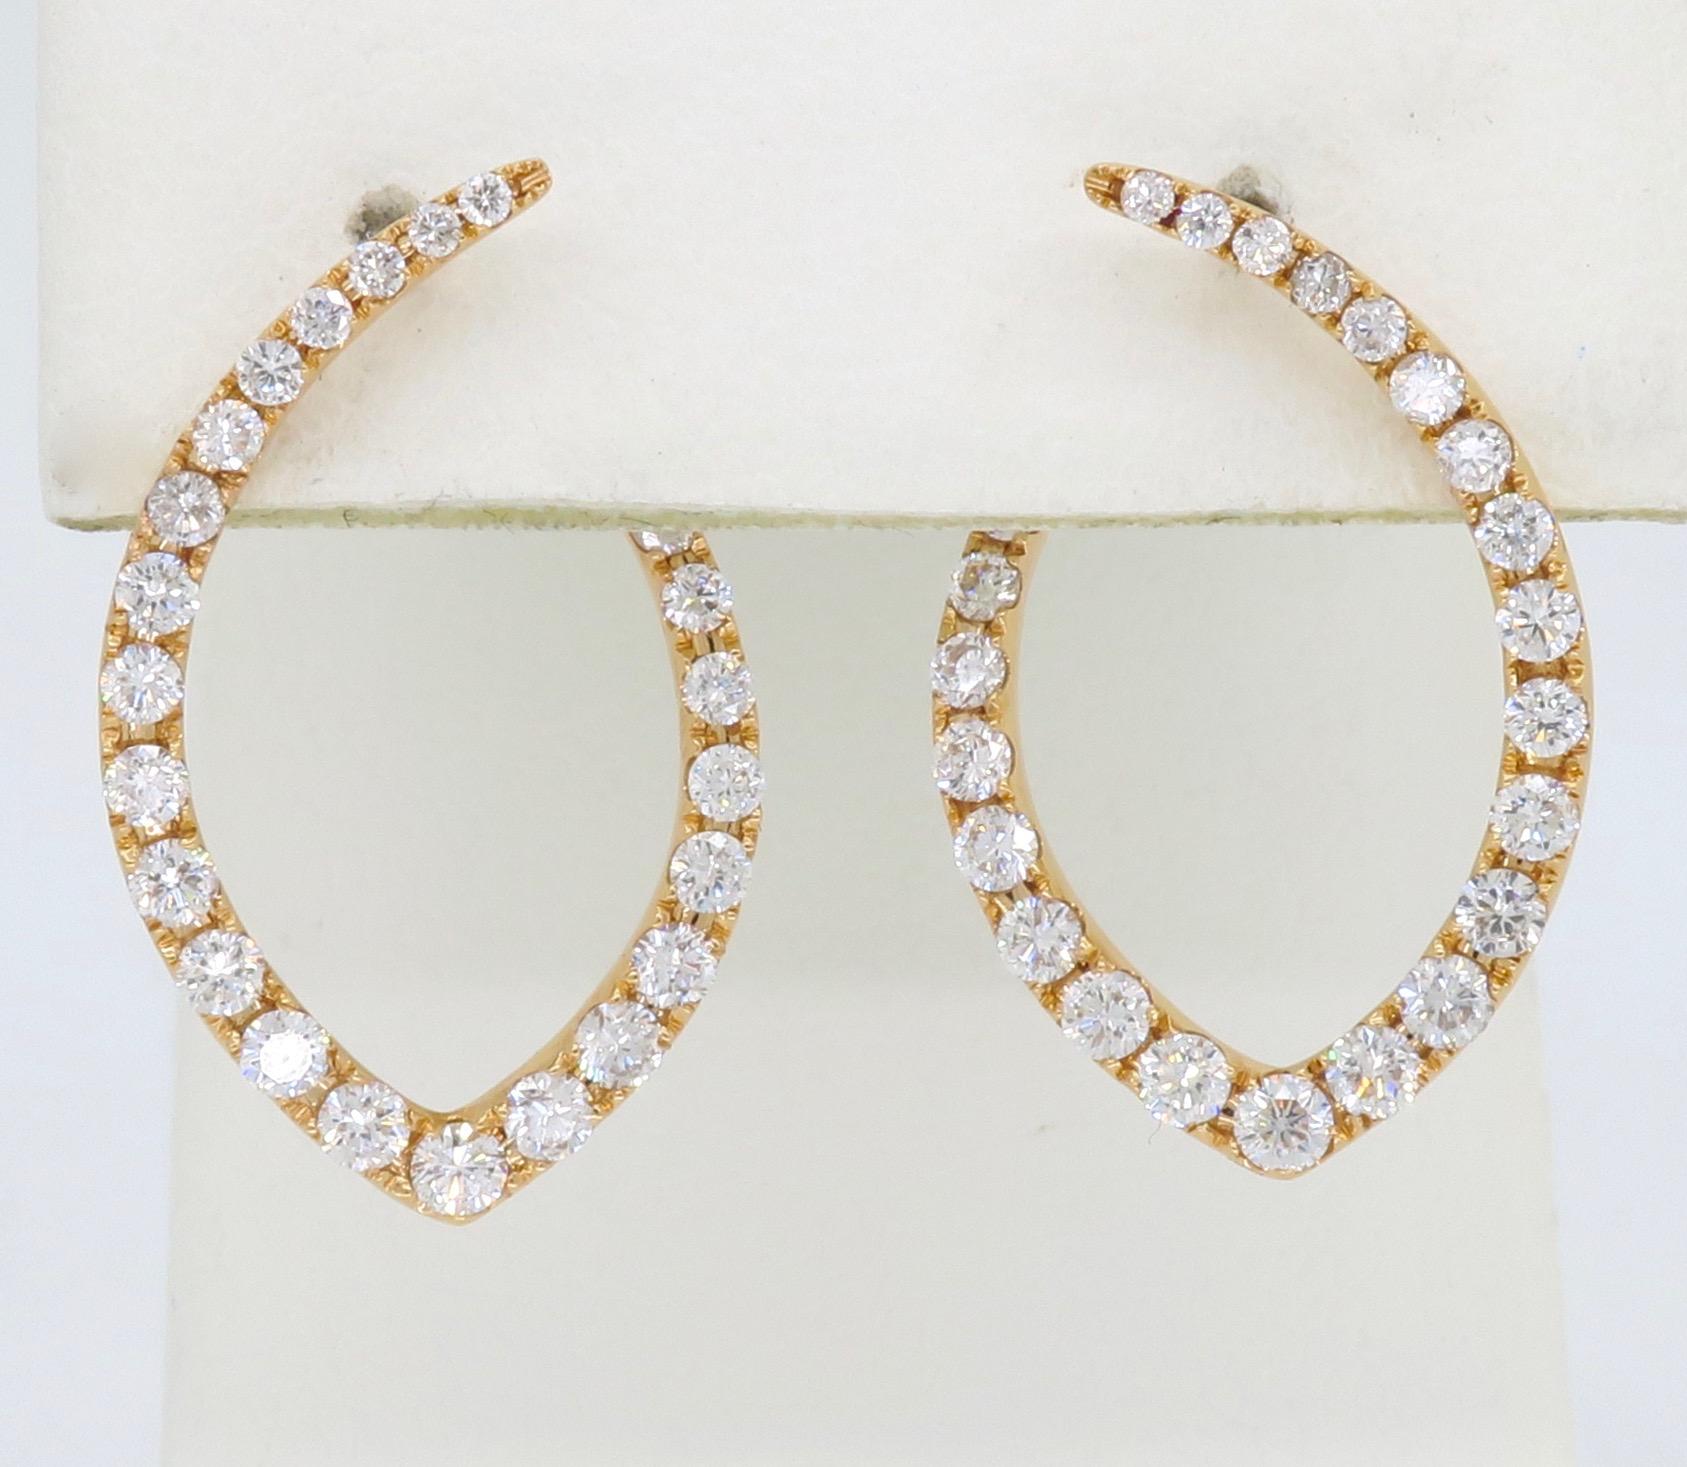 These elegant 18K rose gold earrings are uniquely shaped and feature 48 Round Brilliant Cut Diamonds.

Diamond Carat Weight: Approximately 1.09CTW 
Diamond Cut: 48 Round Brilliant Cut Diamonds
Color: Average G-I
Clarity: Average VS-SI
Metal: 18K